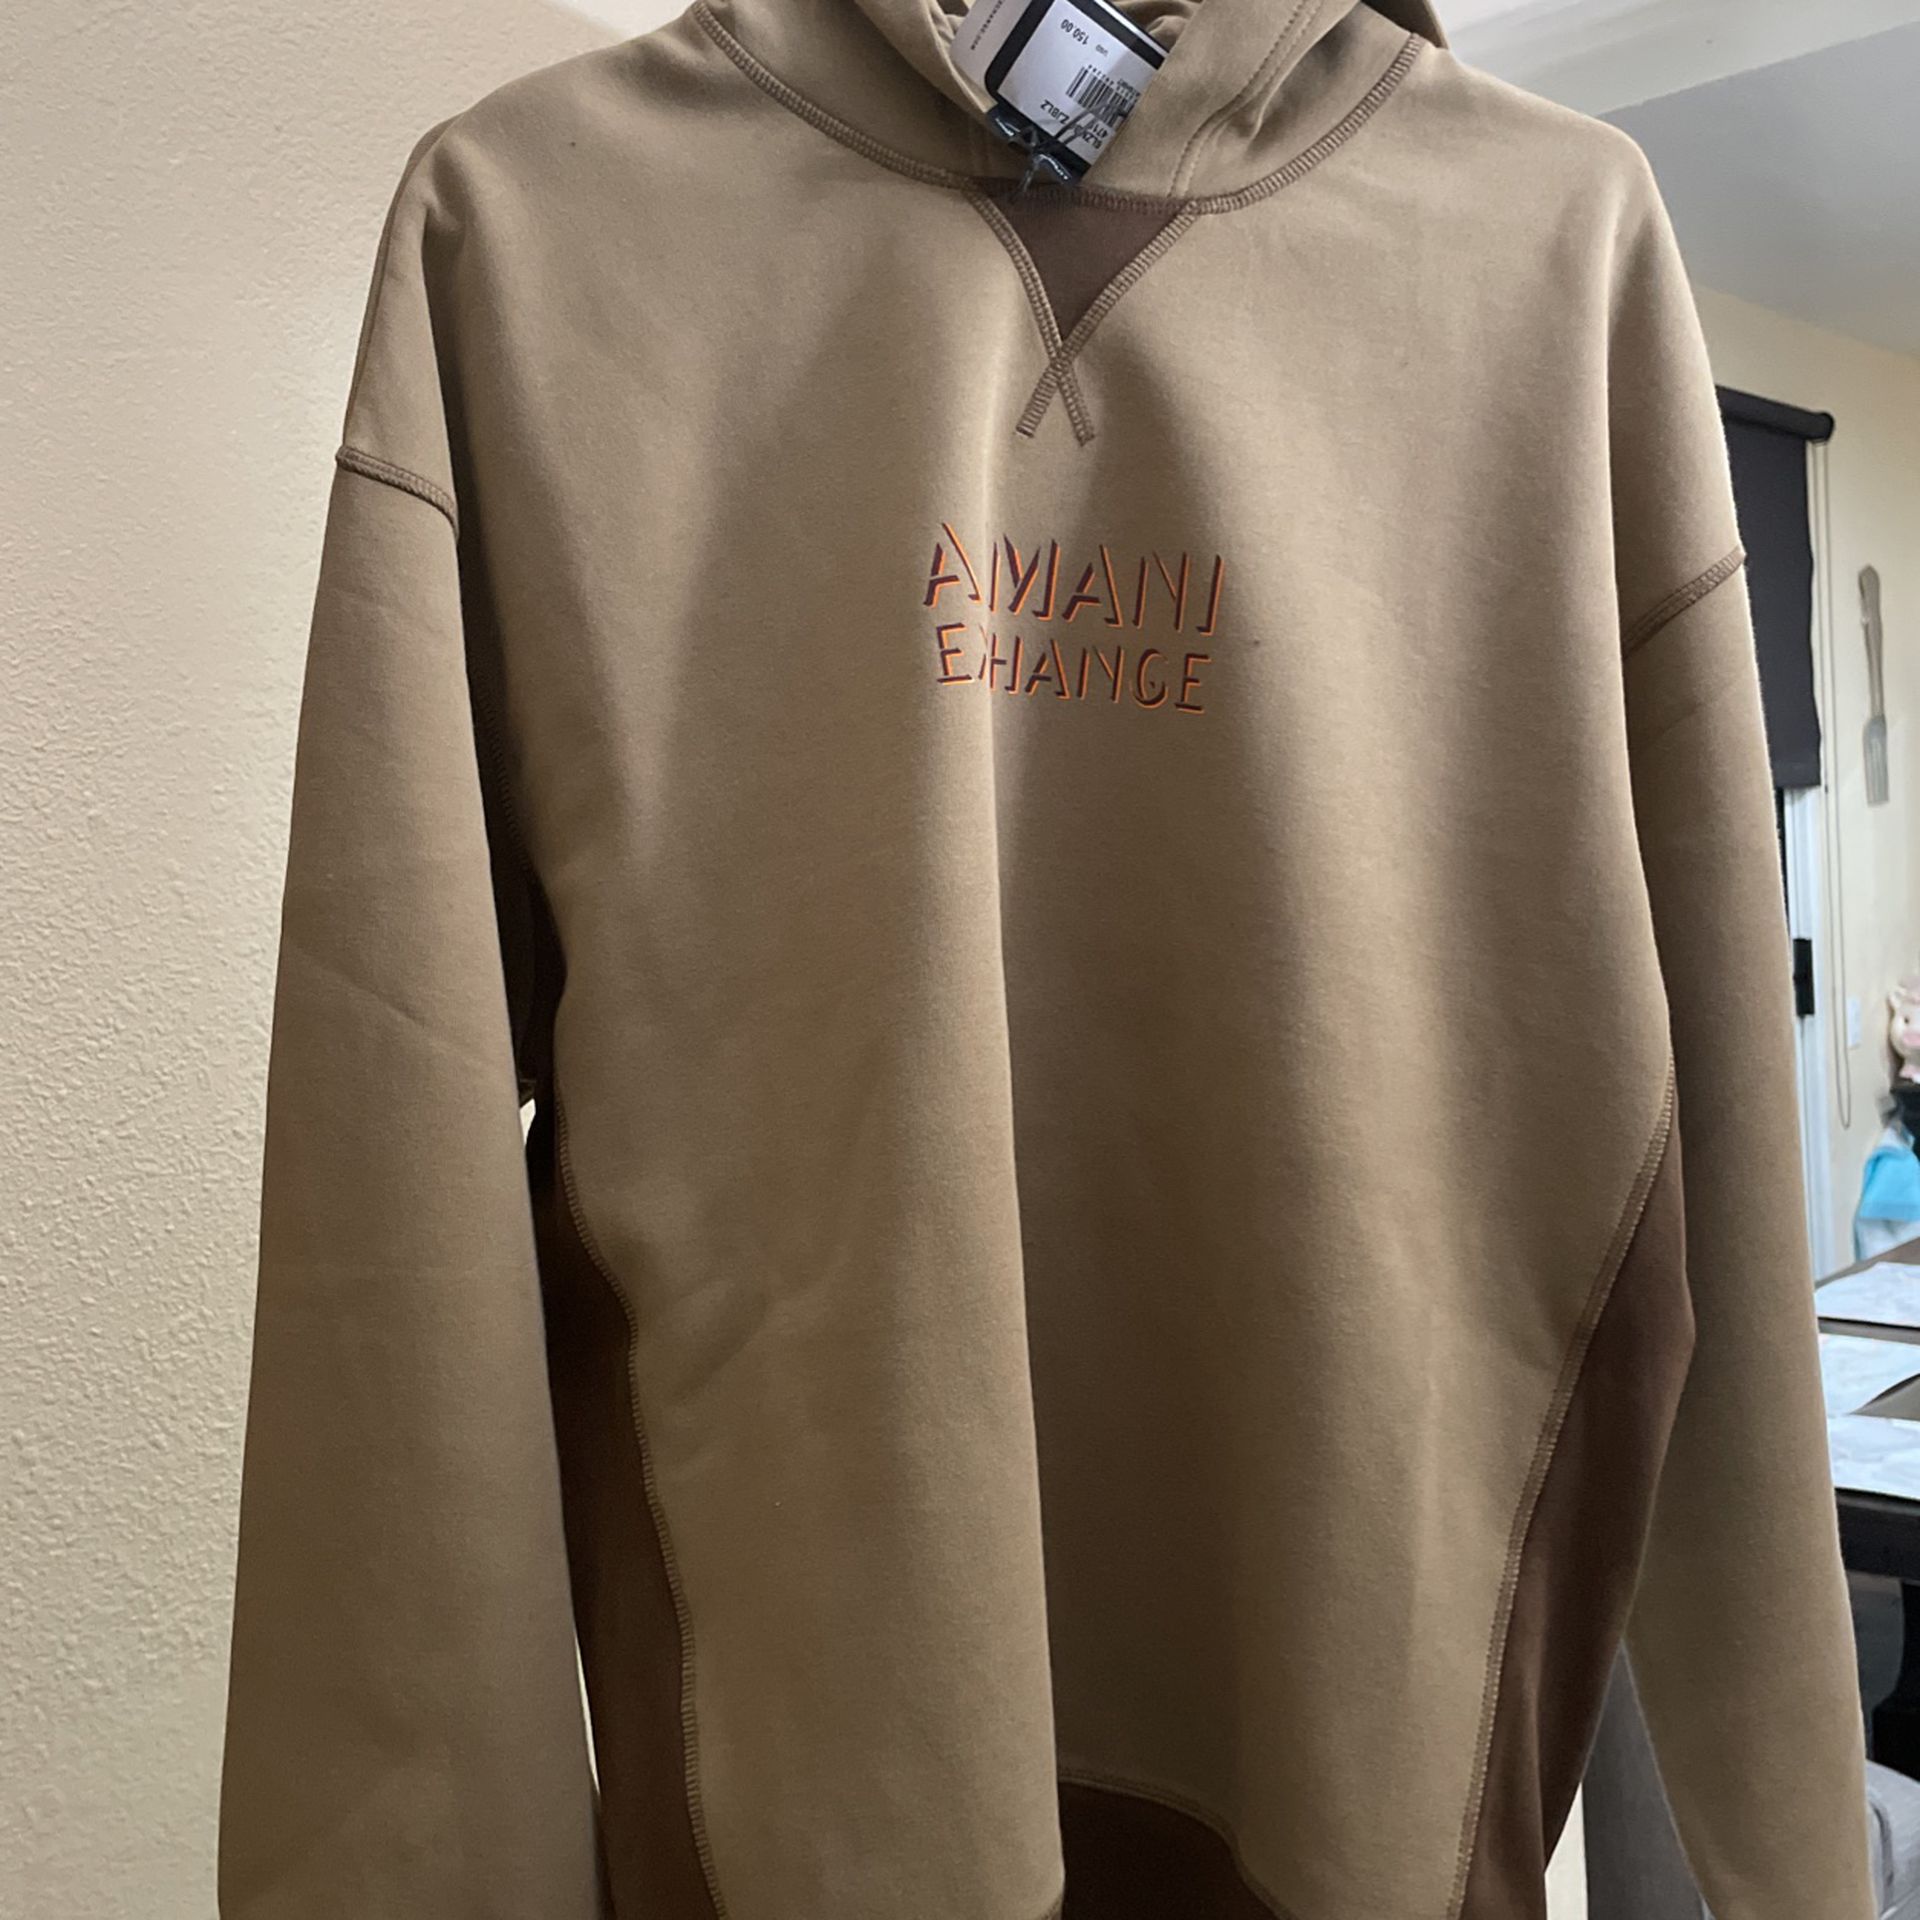 ARMANI EXCHANGE HOODIE for Sale in San Diego, CA - OfferUp